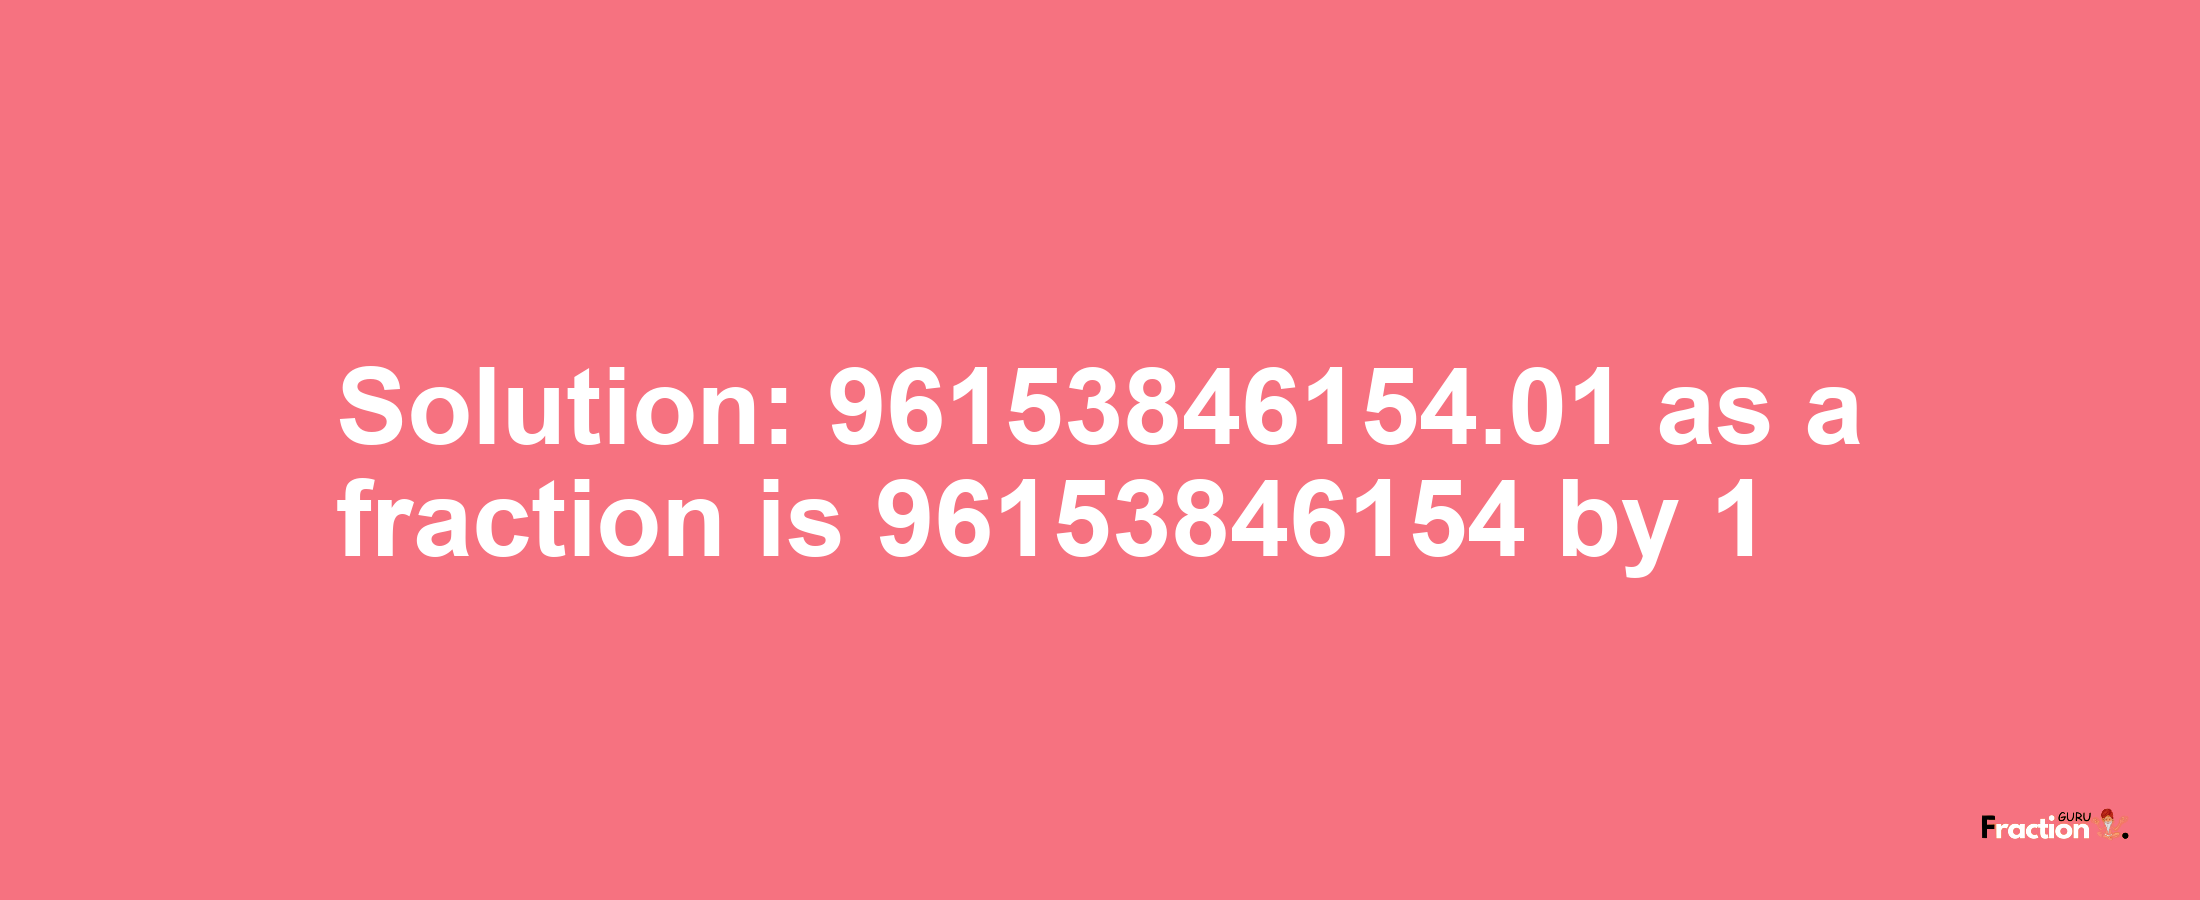 Solution:96153846154.01 as a fraction is 96153846154/1